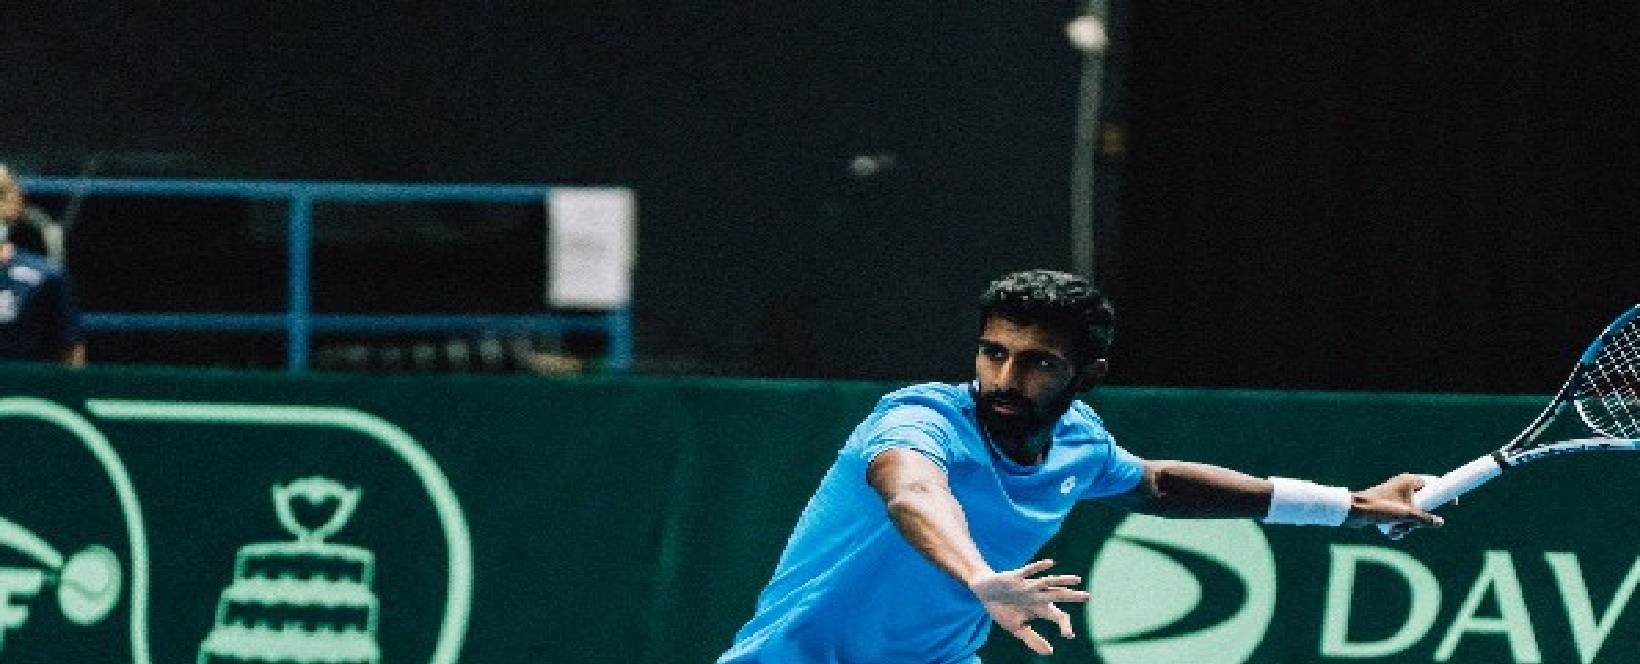 Davis Cup: Denmark's singles squad is not as deep in absence of Rune, says India's Gunneswaran